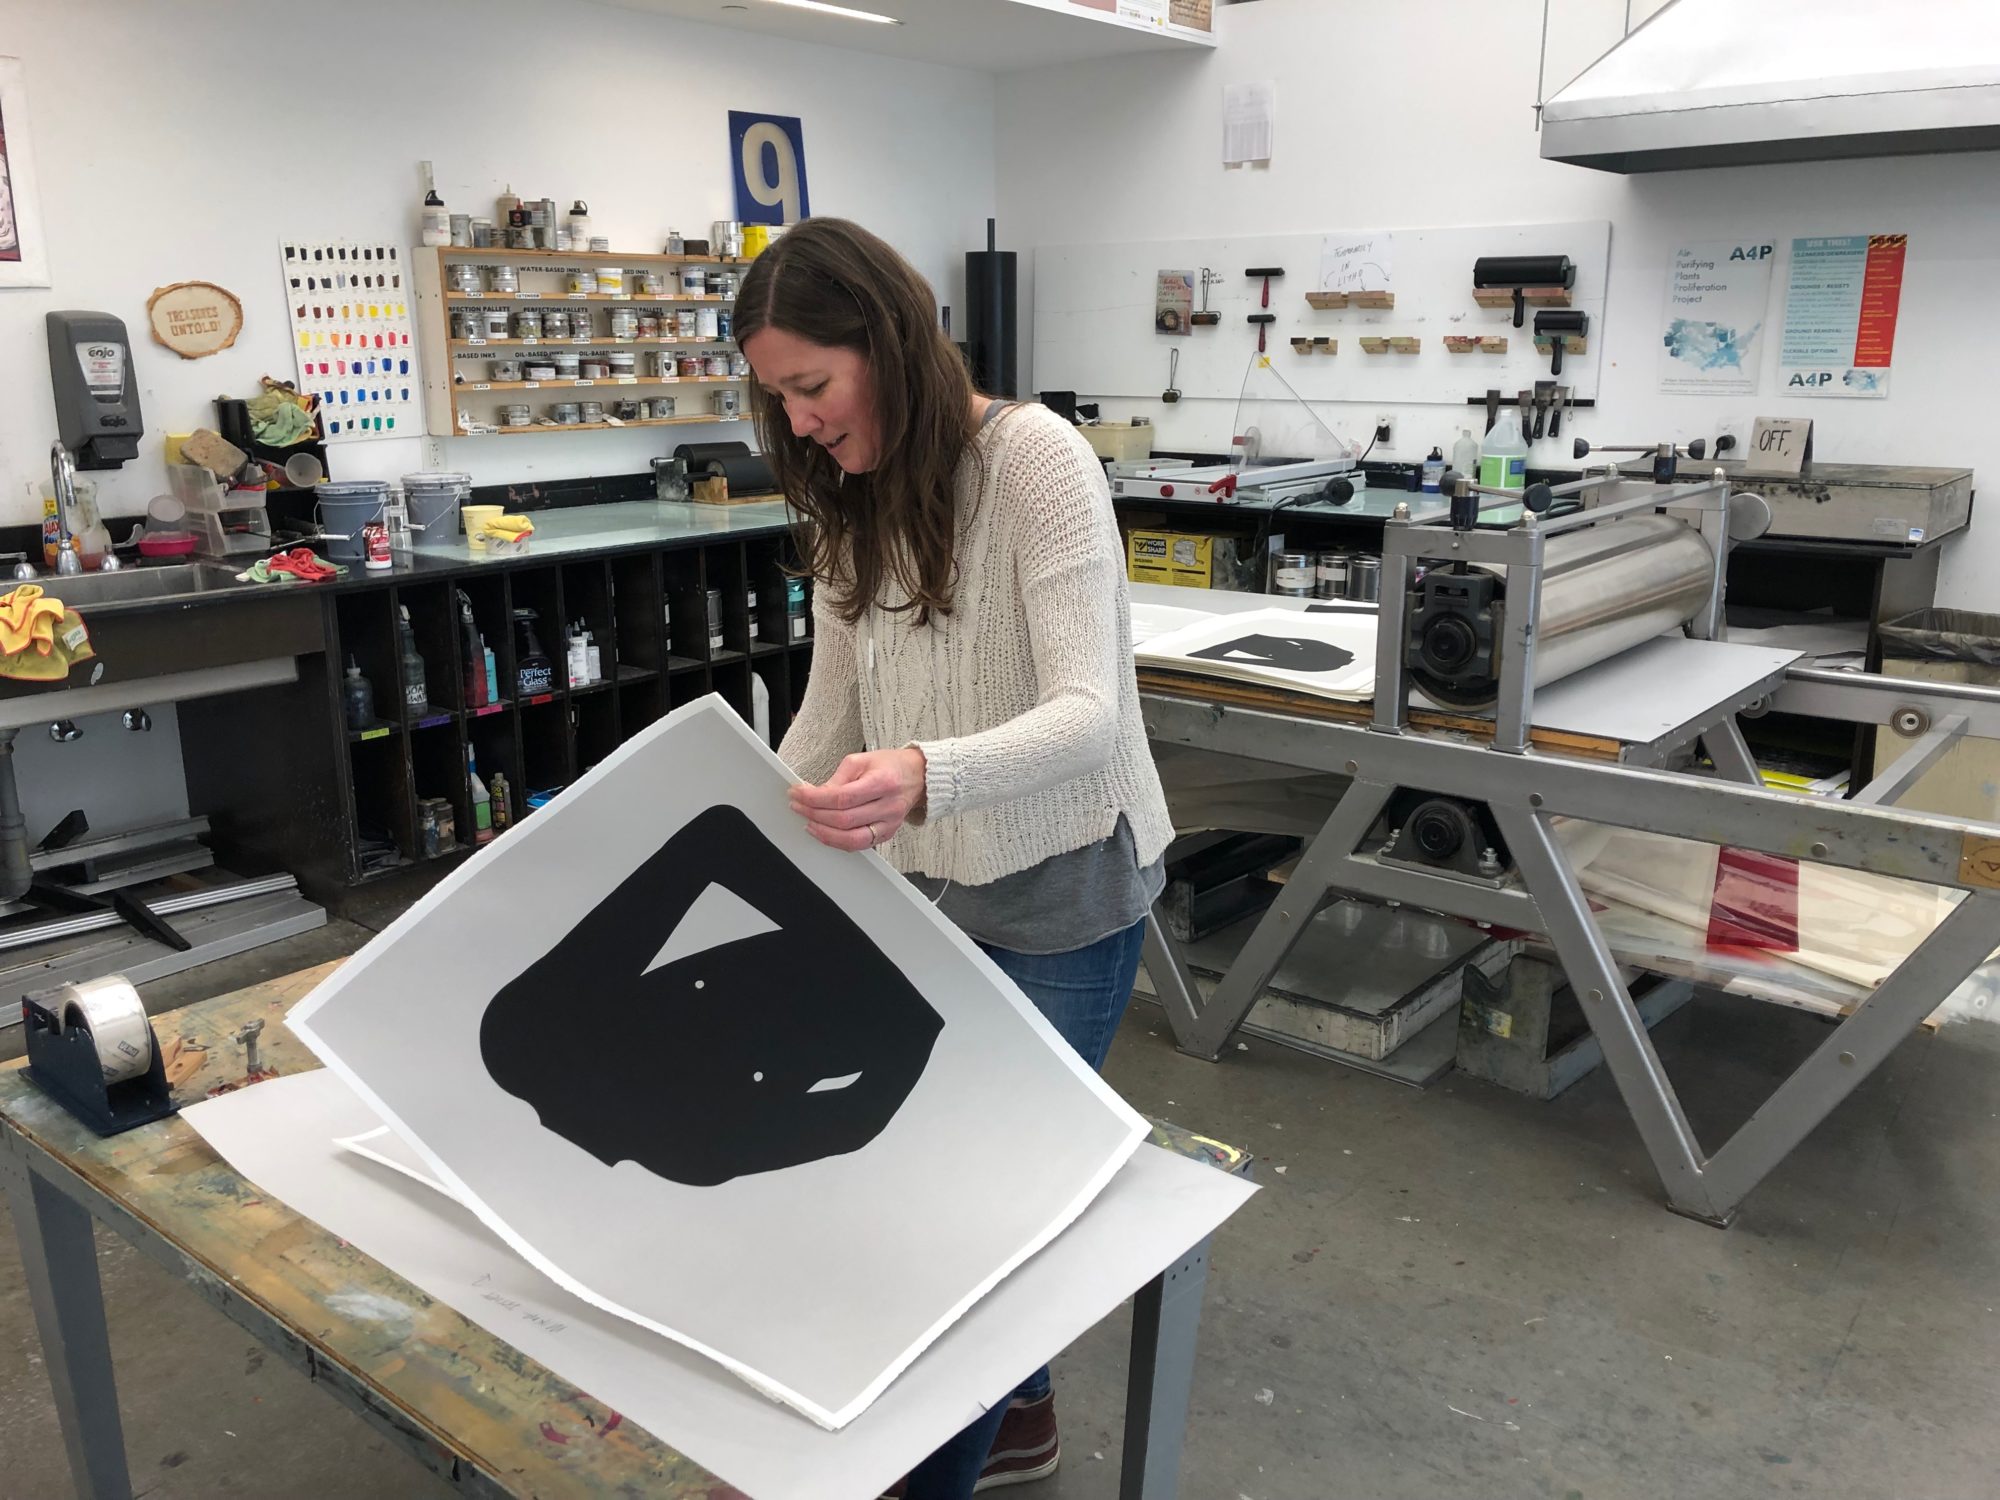 Woman in white sweater flipping through large prints in a printmaking studio